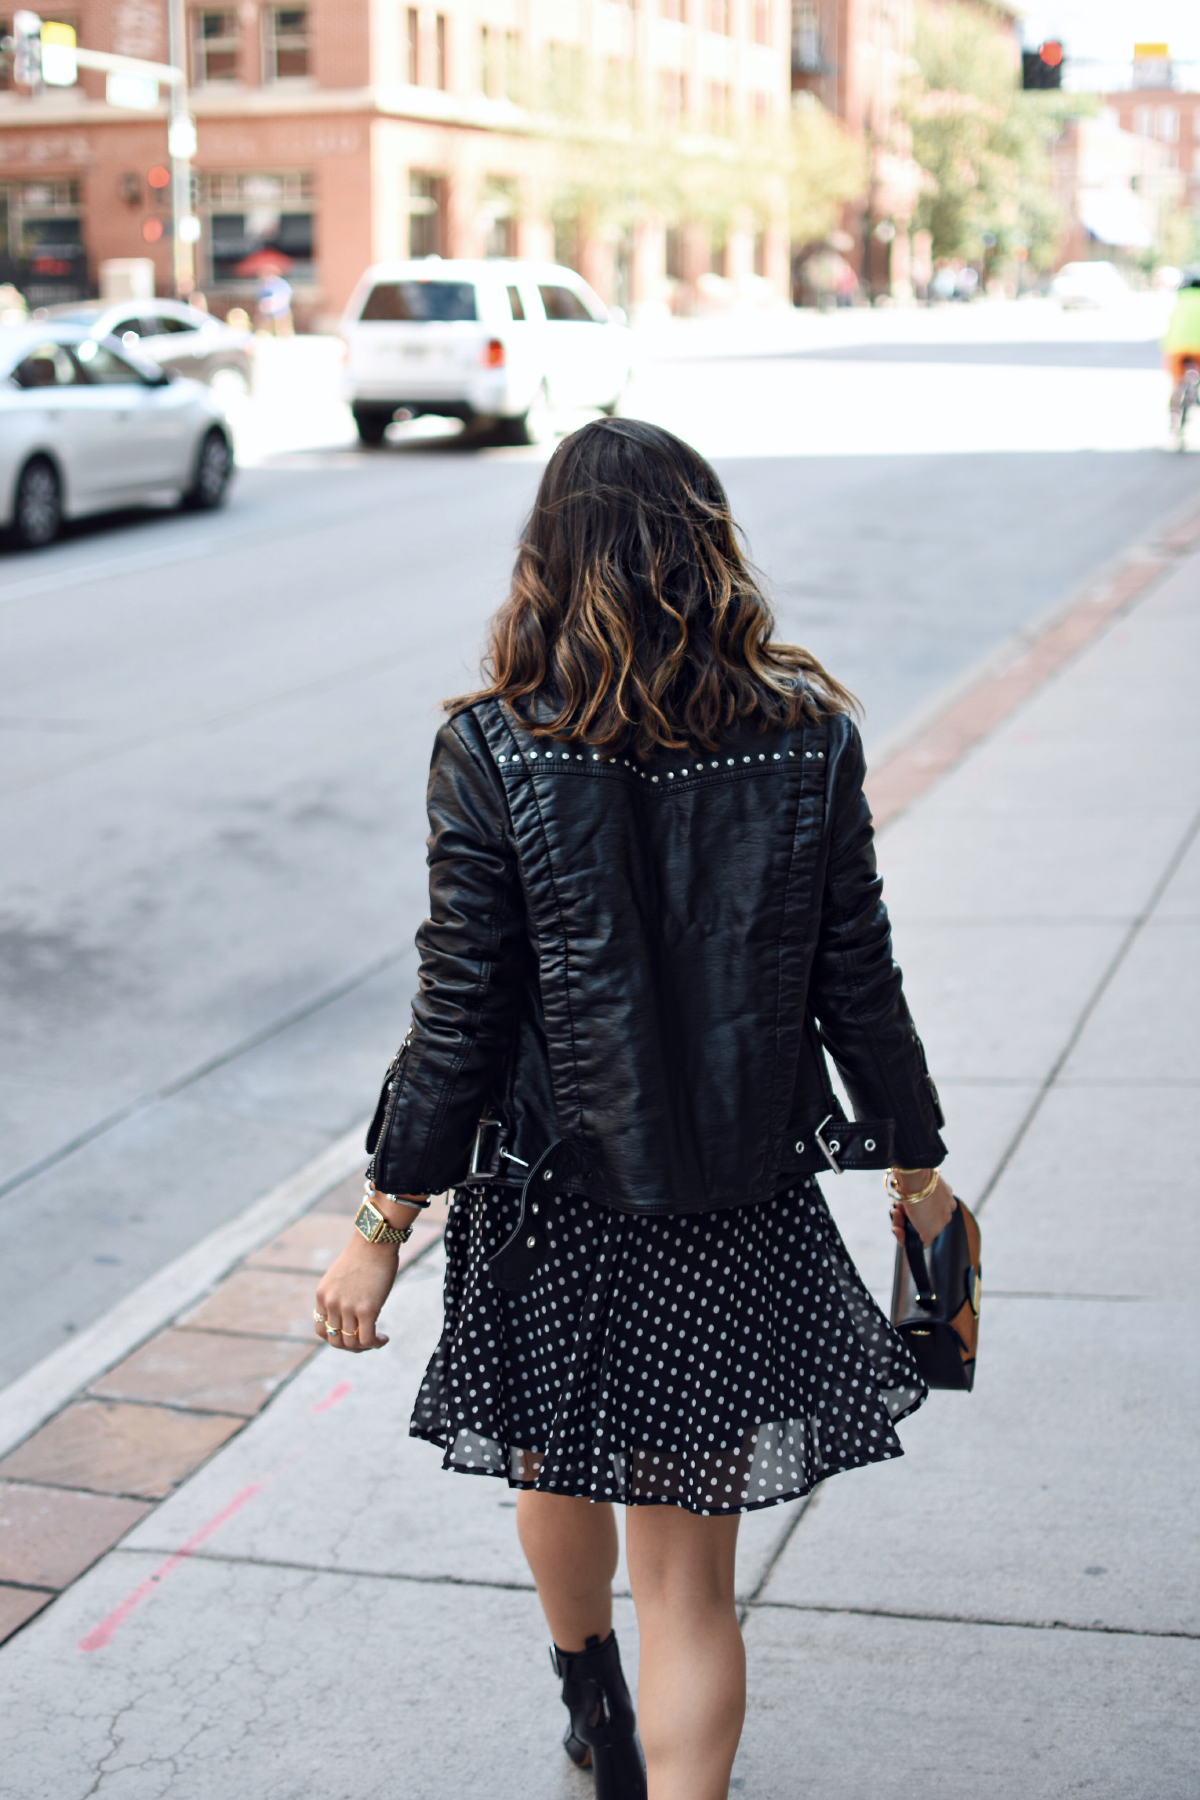 Carolina Hellal of Chic Talk wearing a Free People faux leather jacket, Renamed polka dot dress and h&m black patent leather booties. 